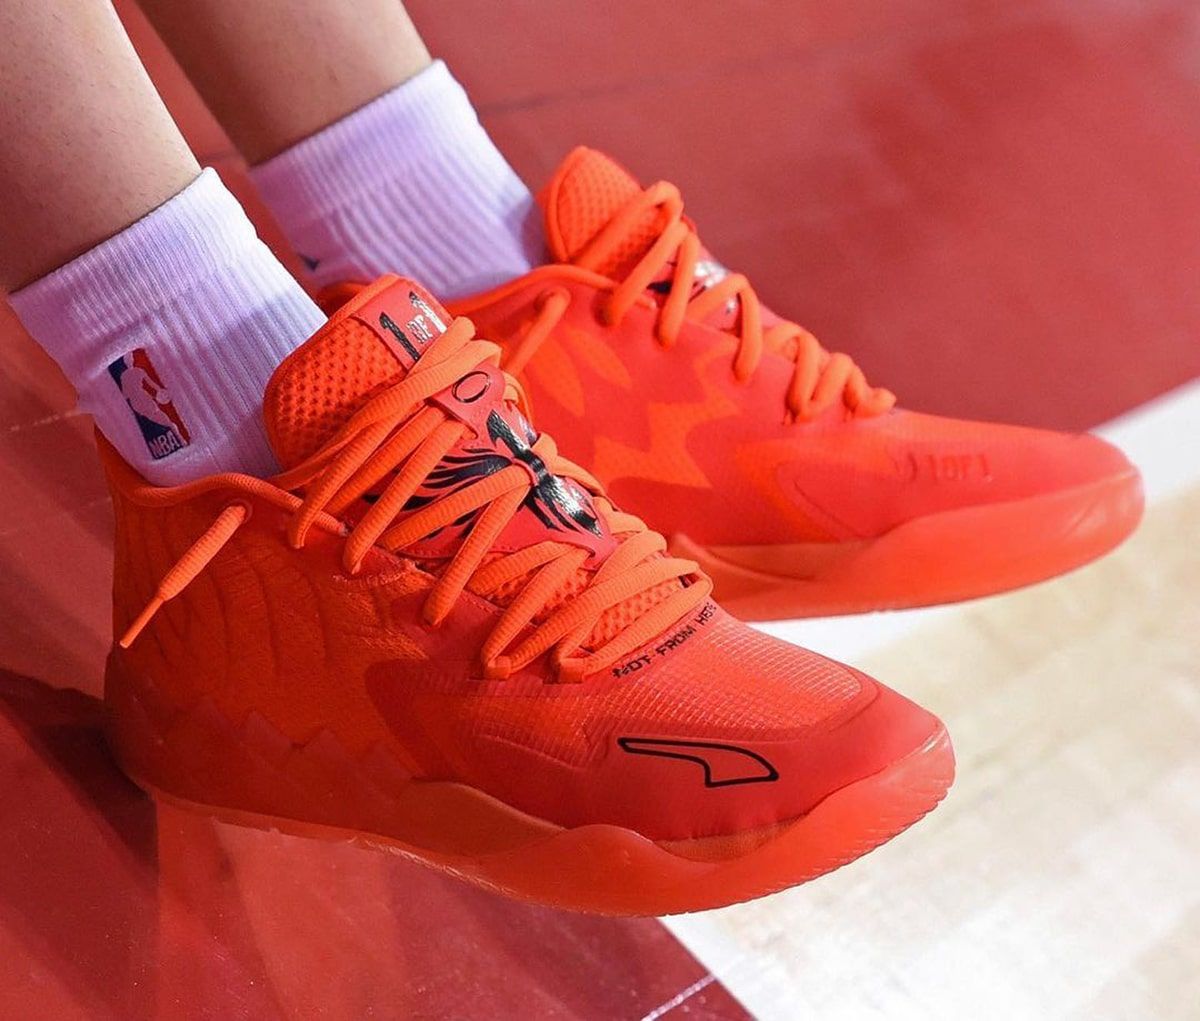 First Looks at LaMelo Ball's Signature PUMA MB1 Sneaker | HOUSE OF 